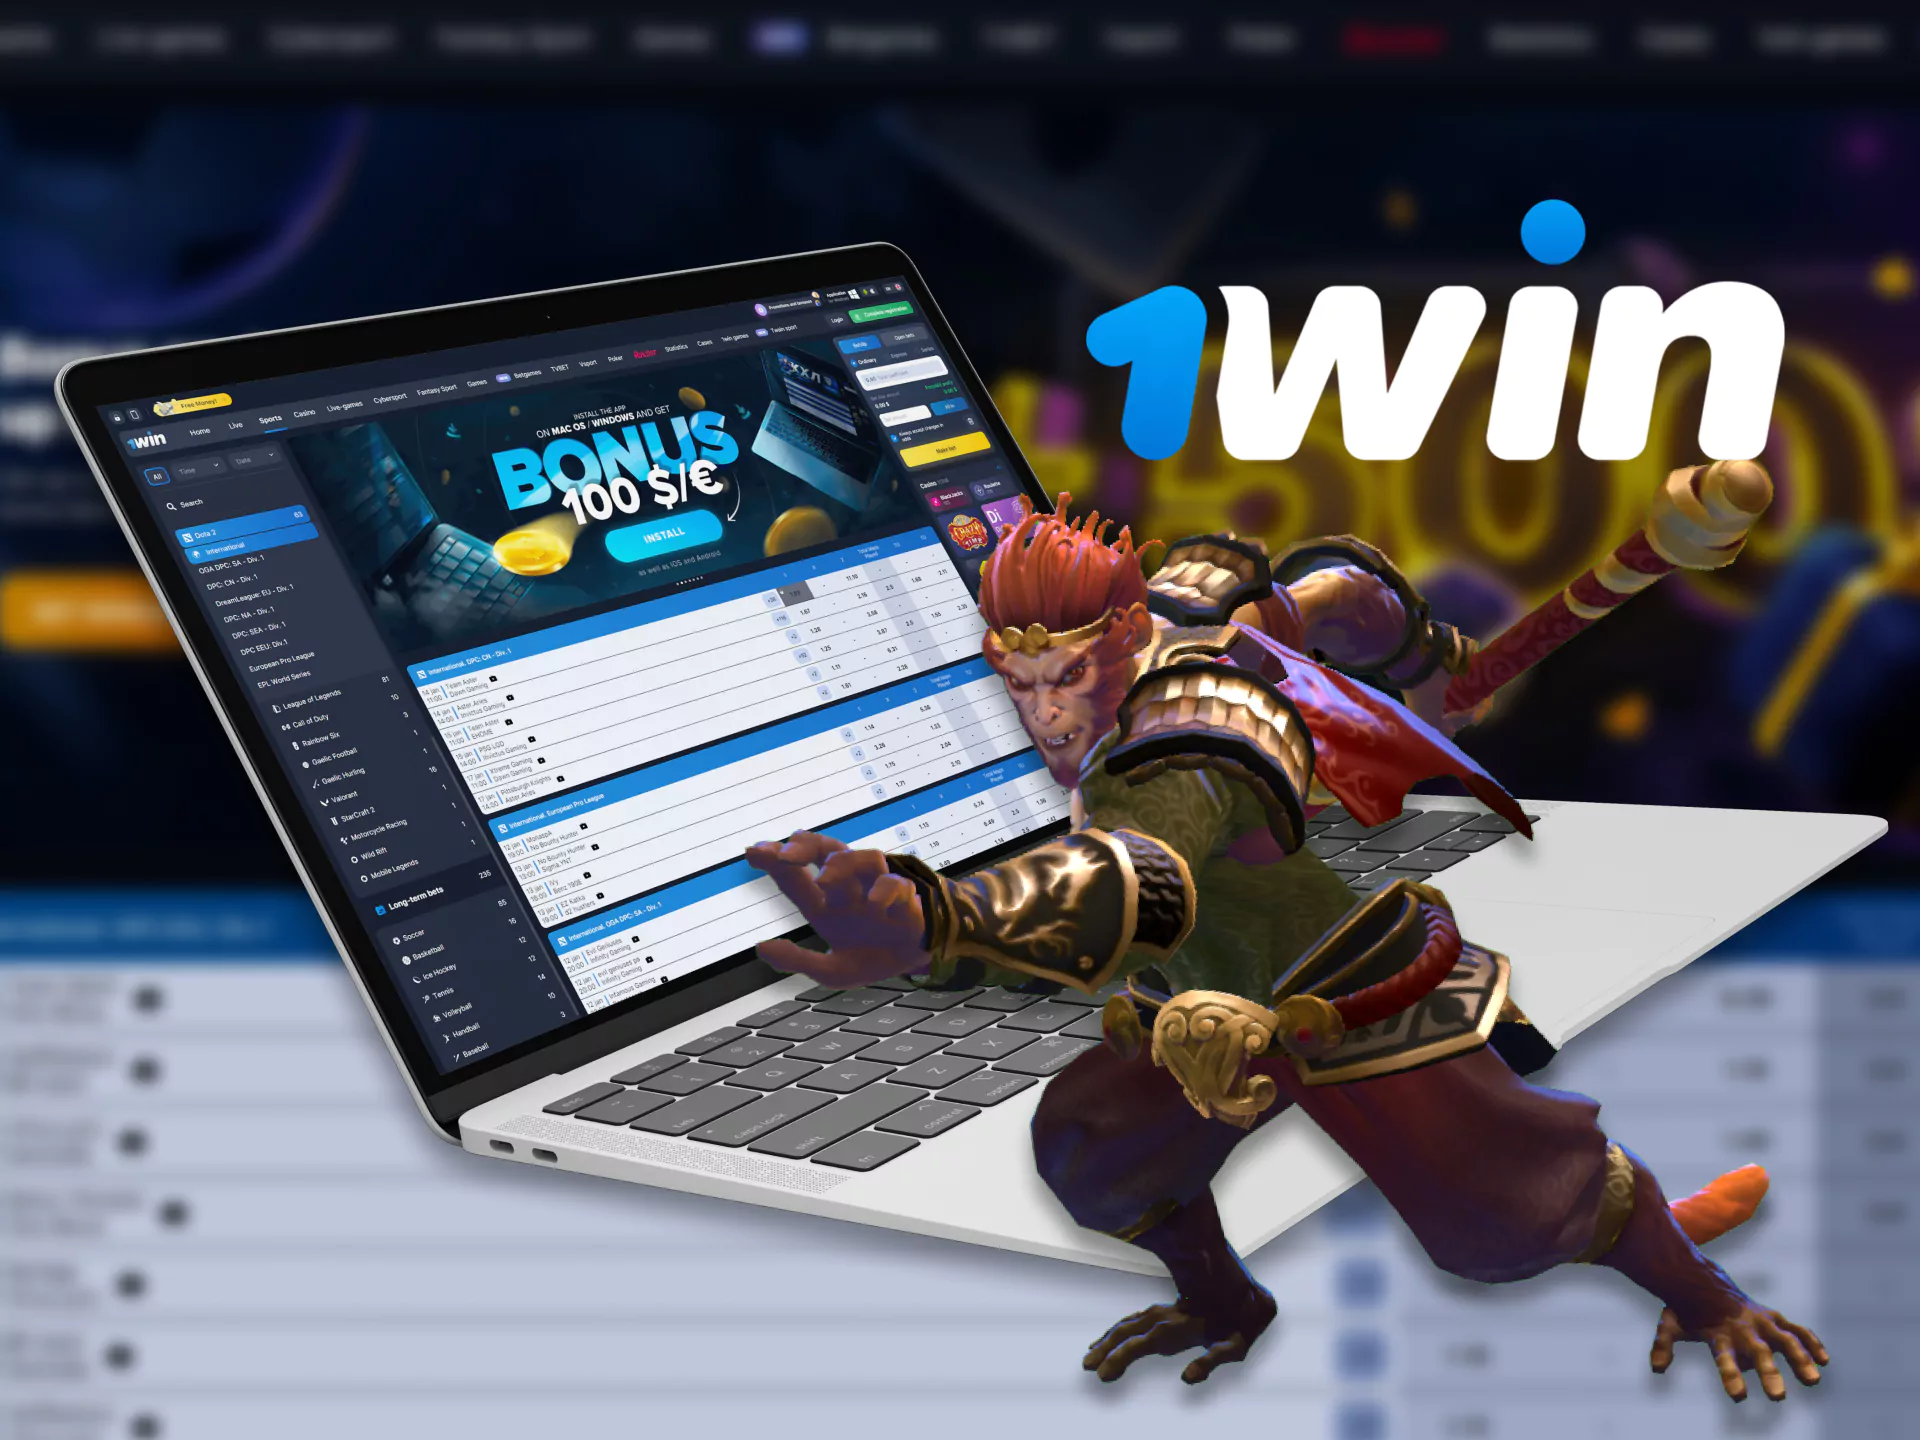 In 1Win you can bet on DOTA 2.